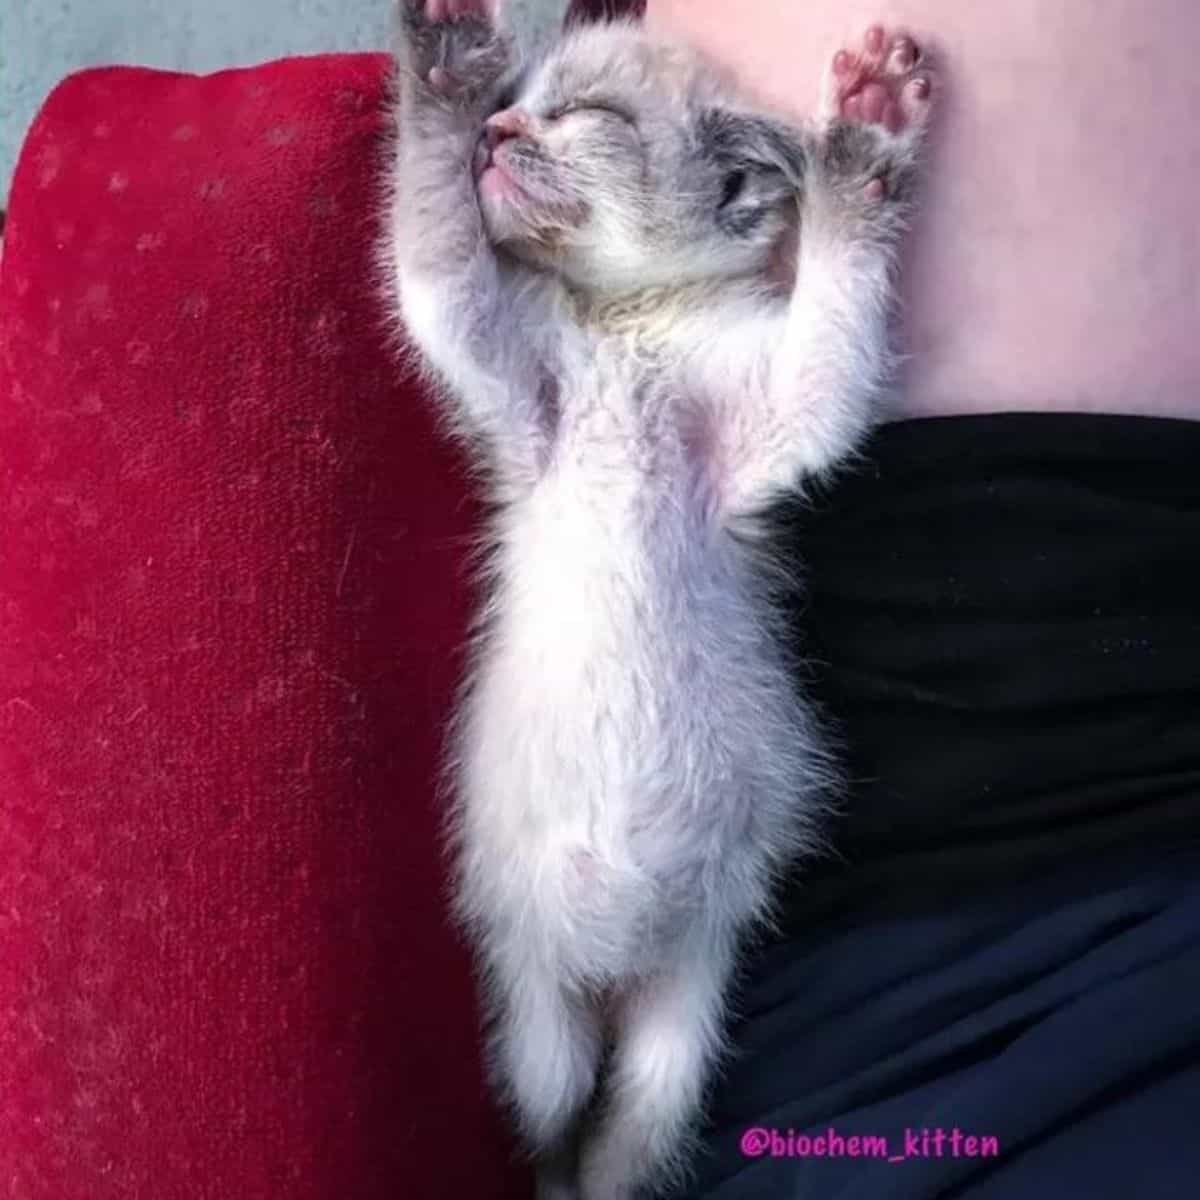 kitten stretched out sleeping